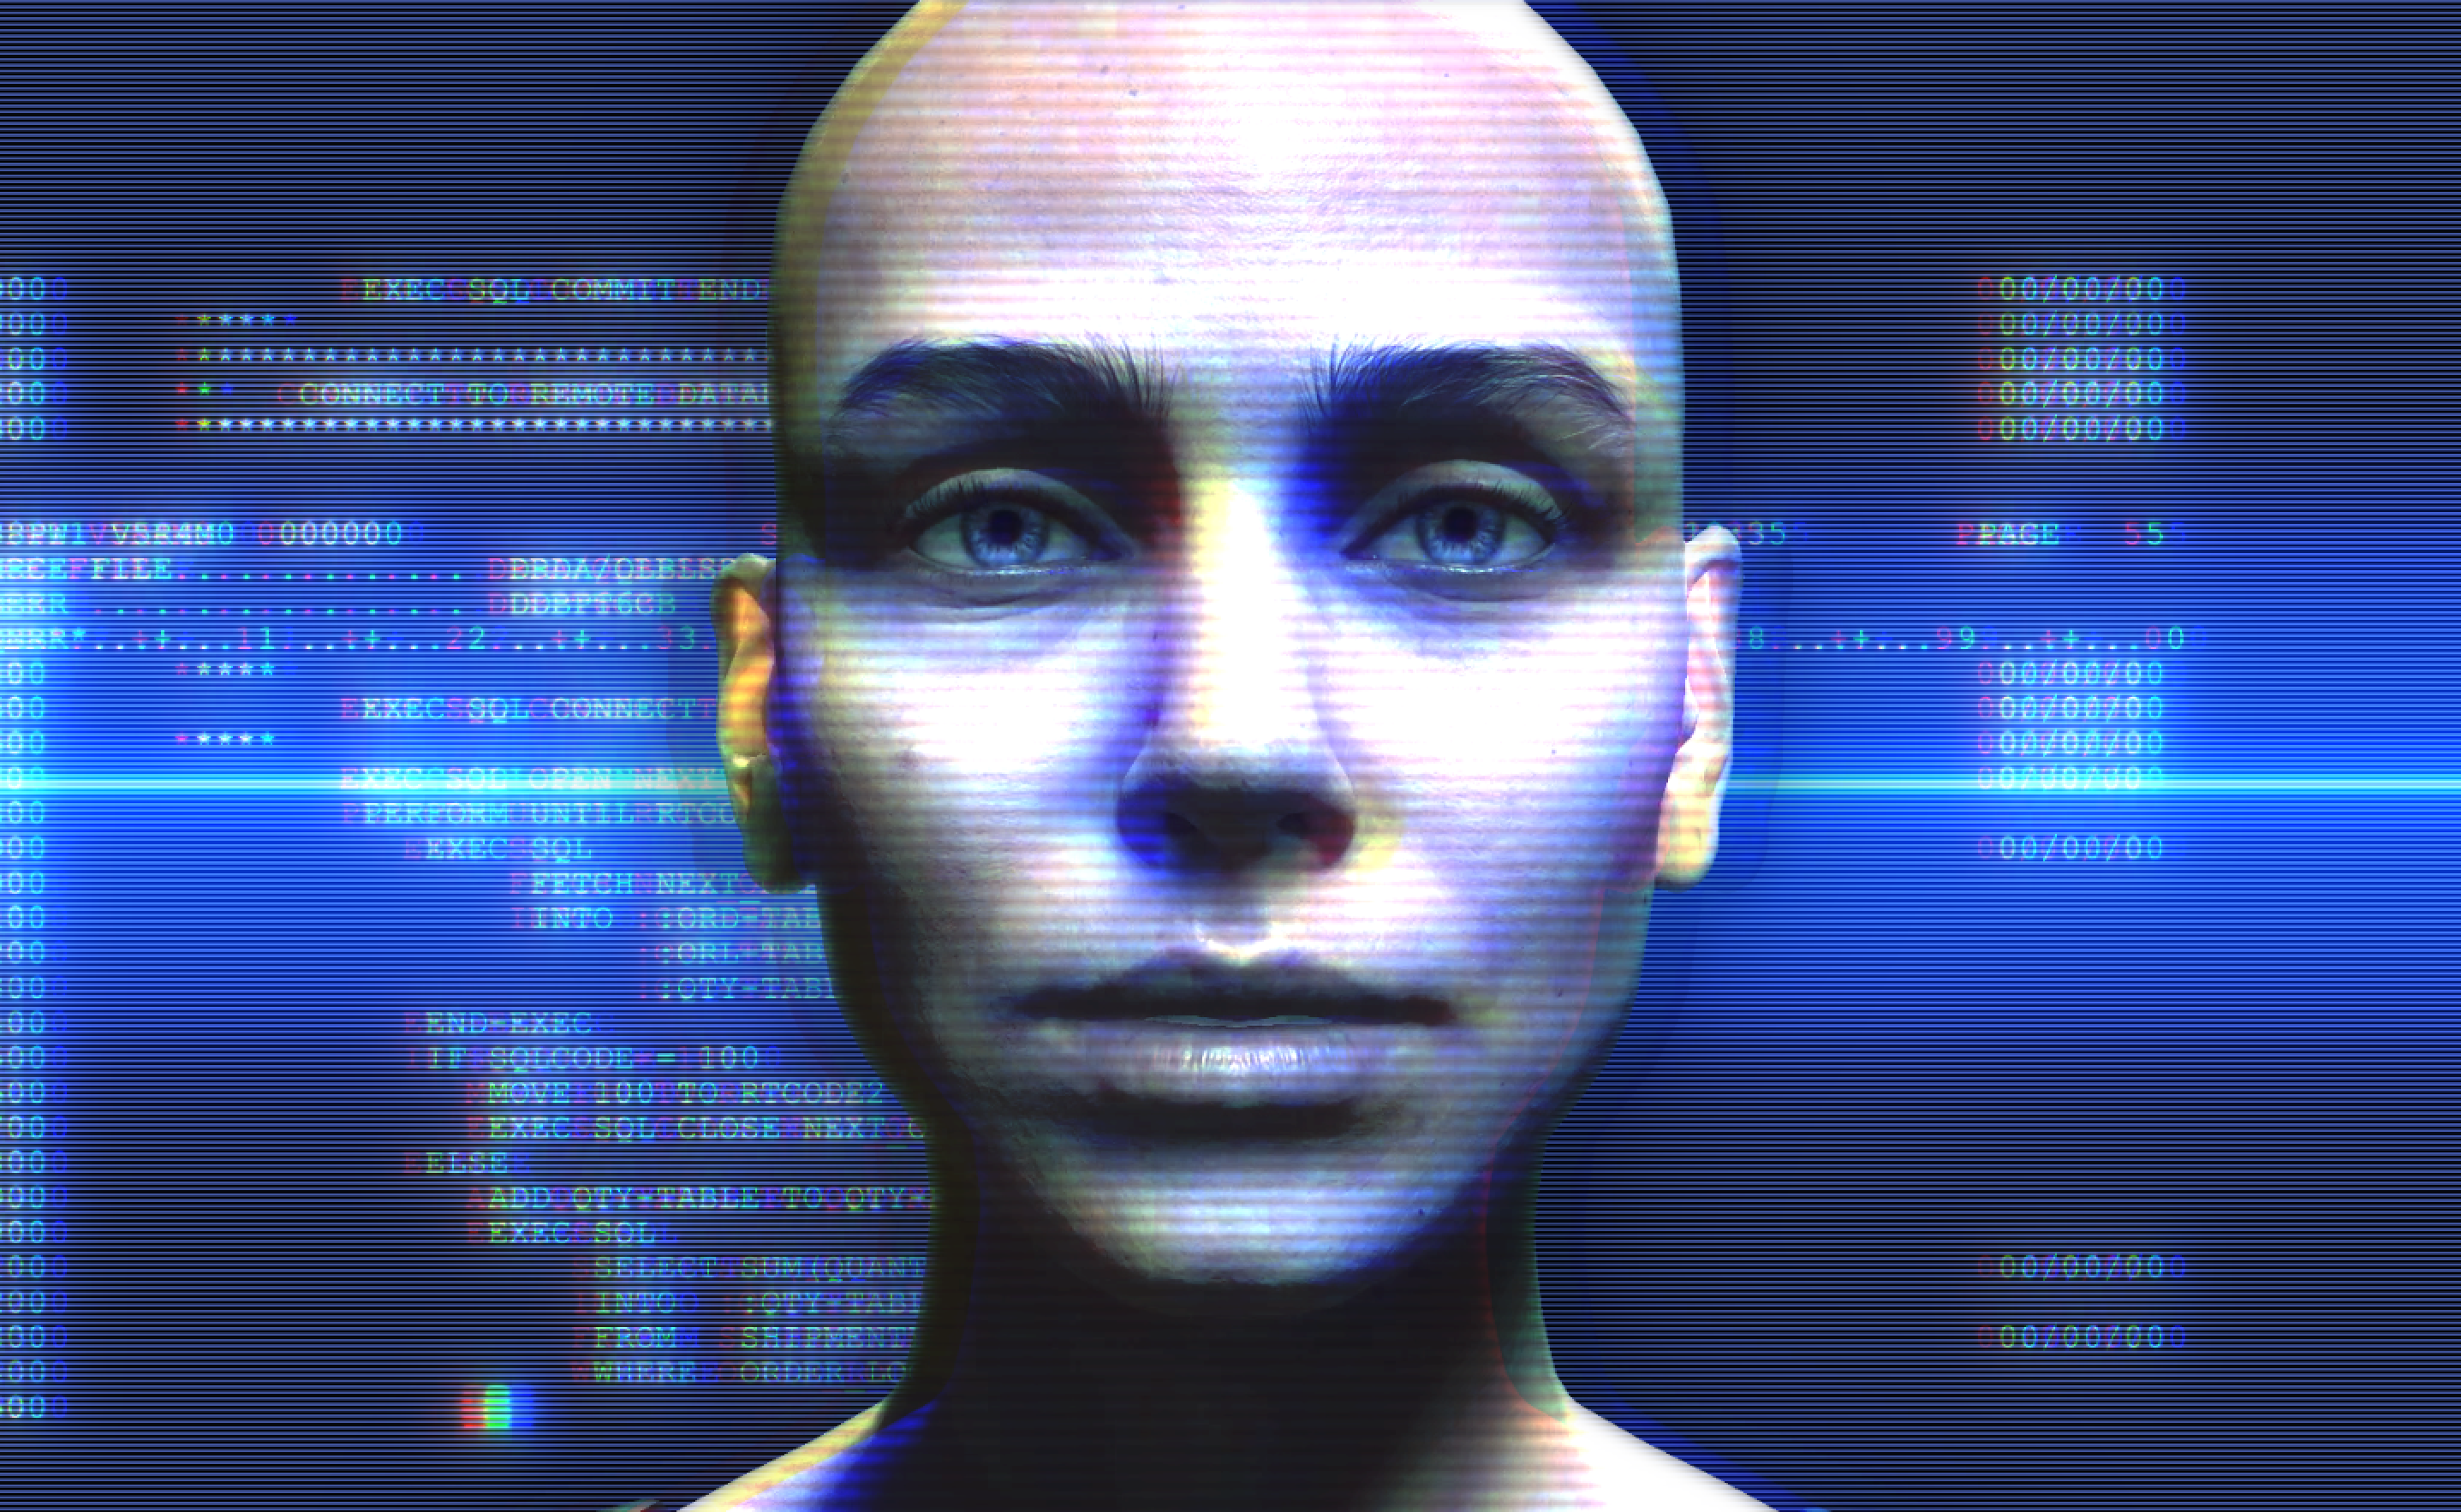 a human-appearing, light-skinned avatar with a bald head in front of a blue background displaying numbers like a computer screen